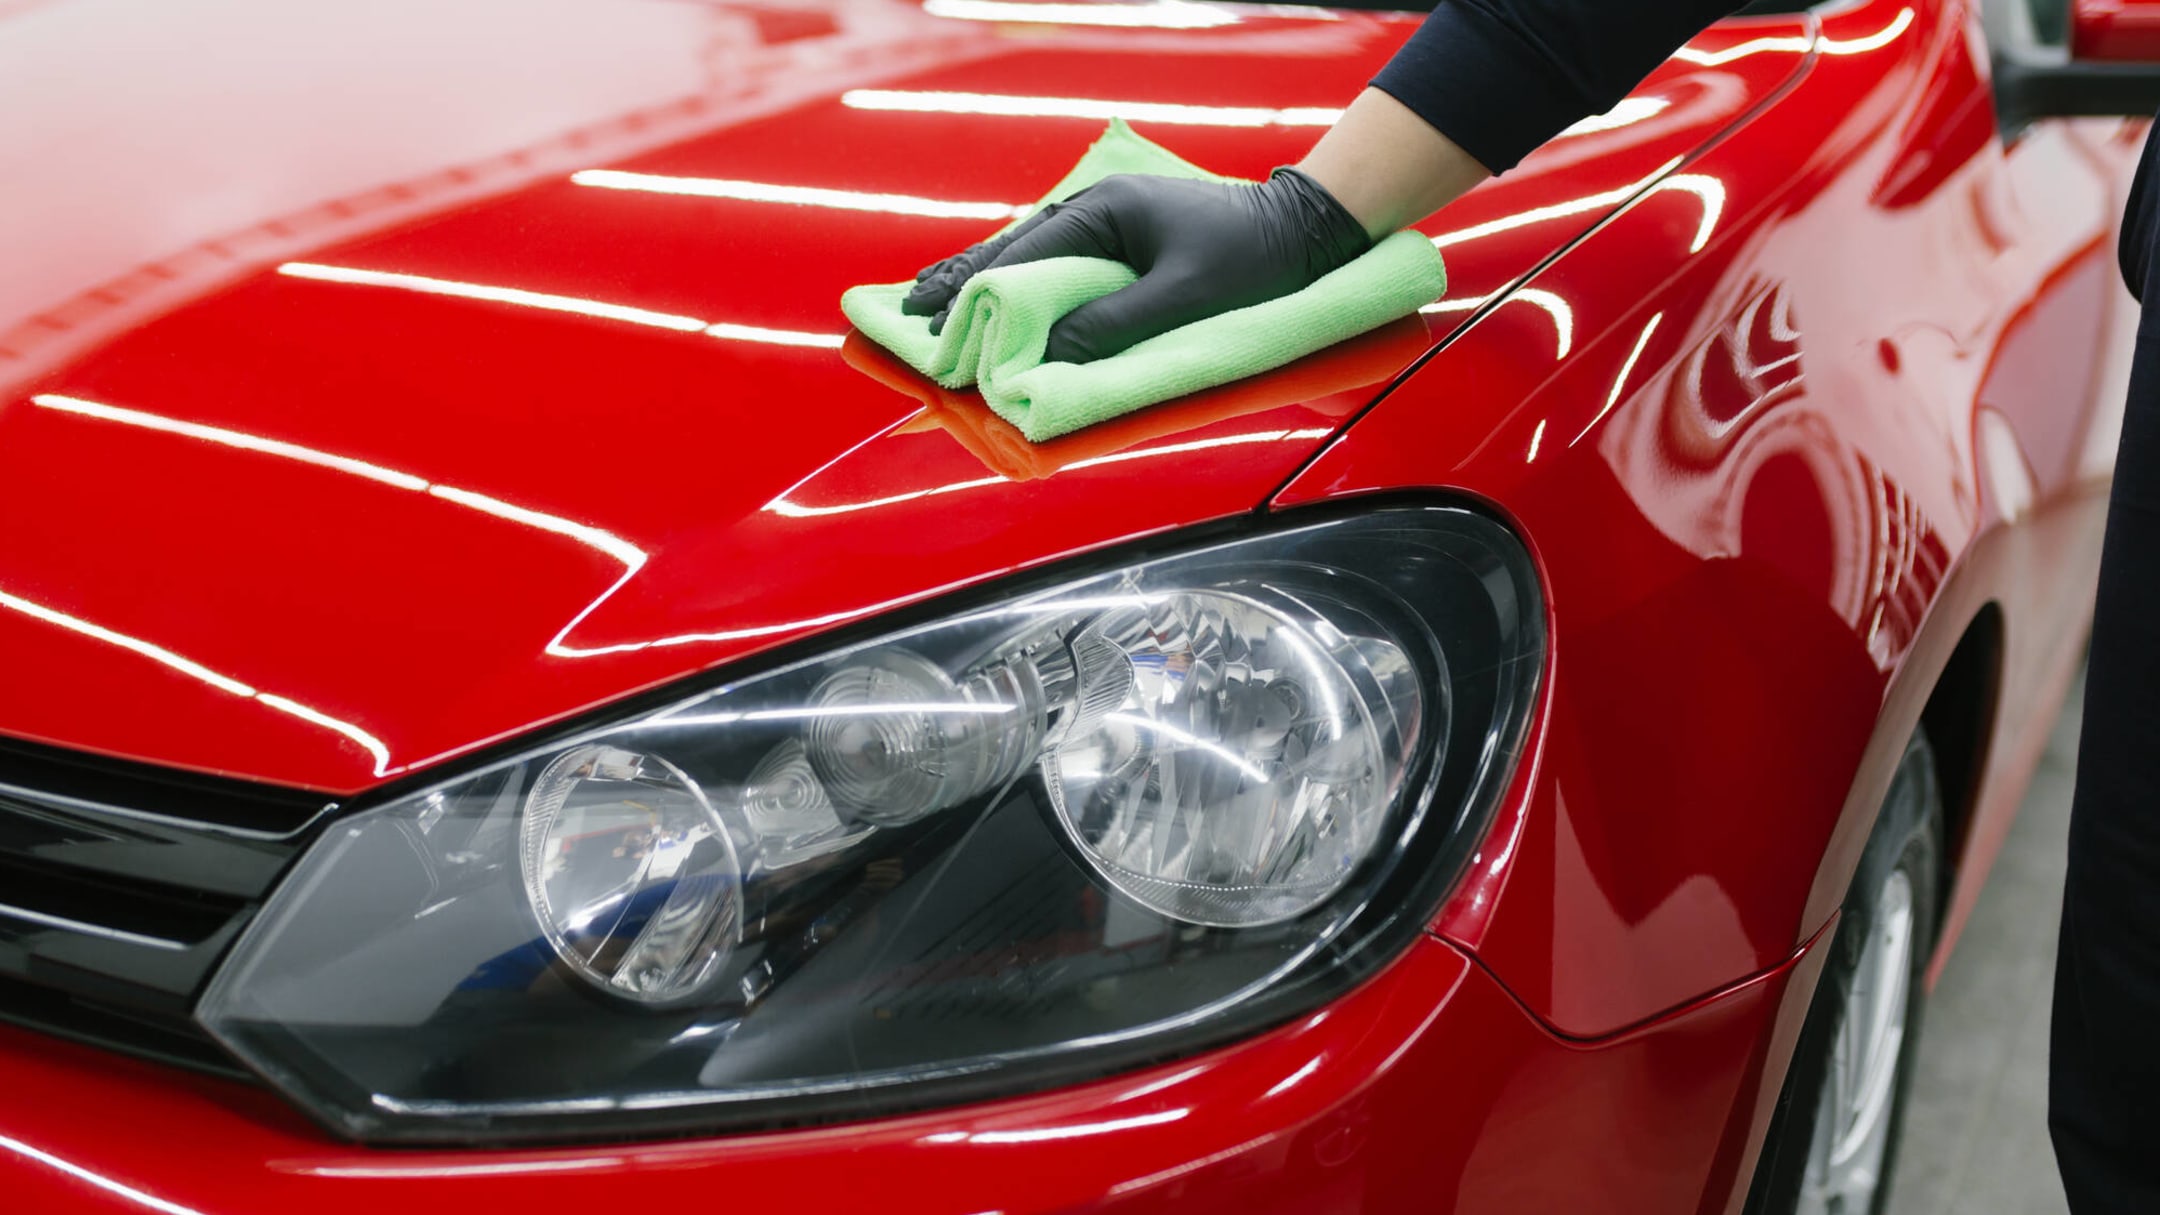 How to save money while keeping your car clean